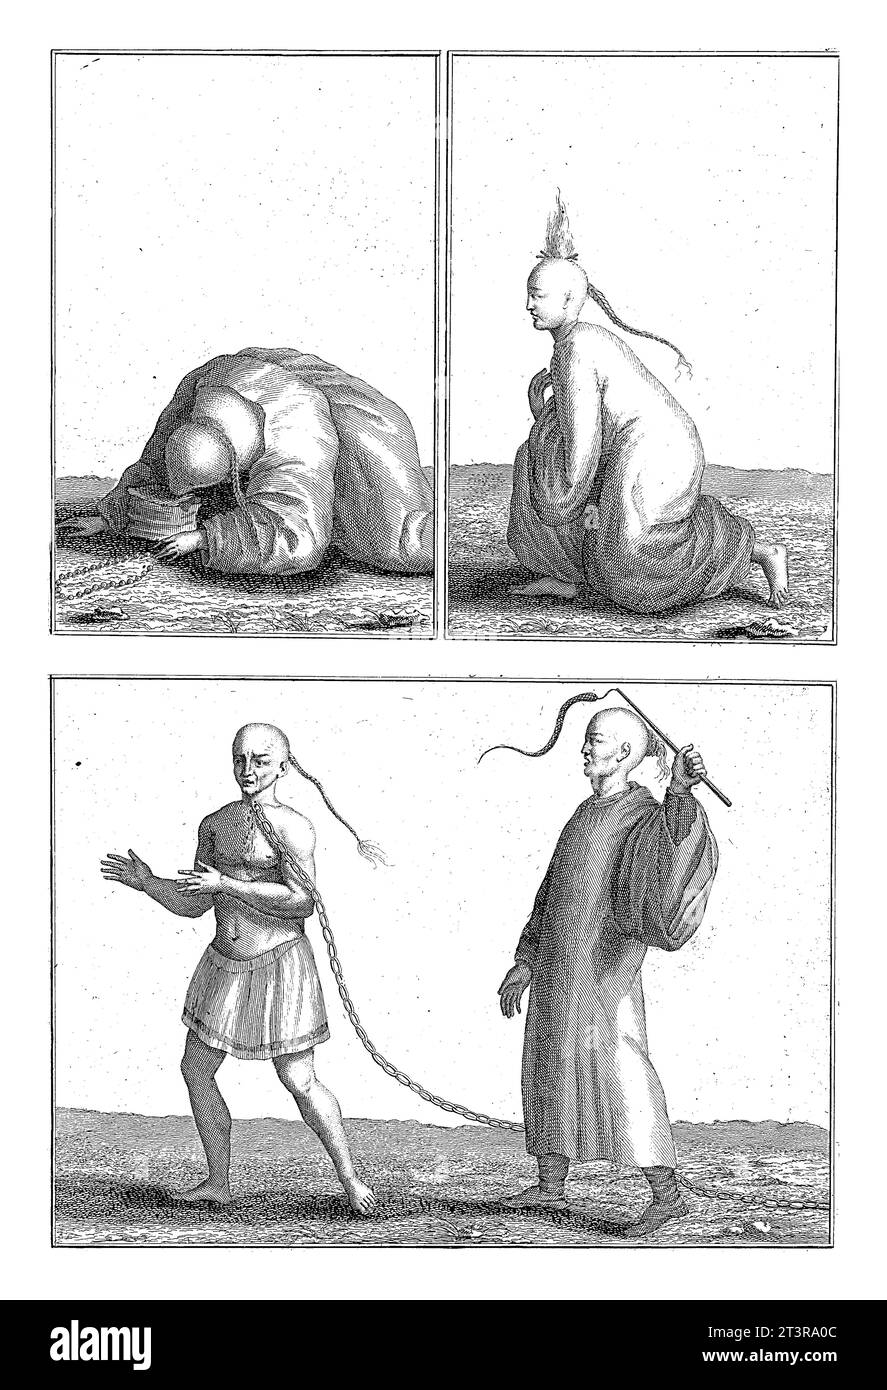 Chinese mendicant monks tormenting themselves, Bernard Picart (workshop of), 1728 Sheet with three representations of Chinese mendicant monks. Stock Photo